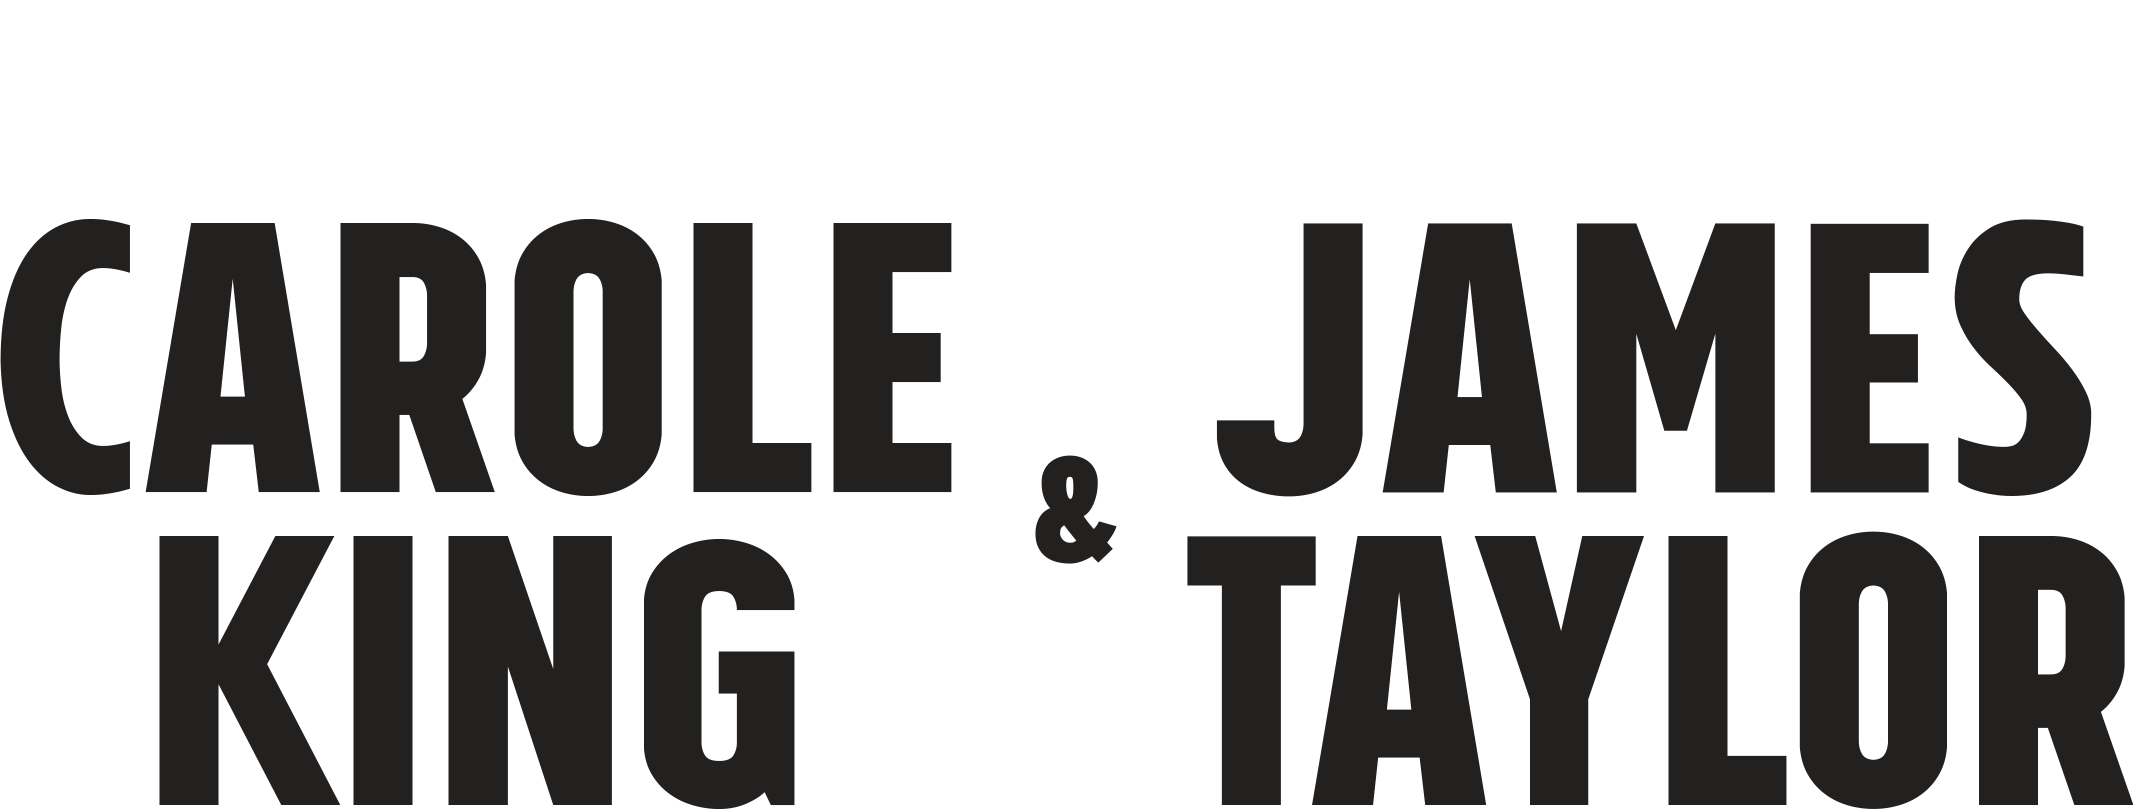 The Music of Carole King and James Taylor Logo